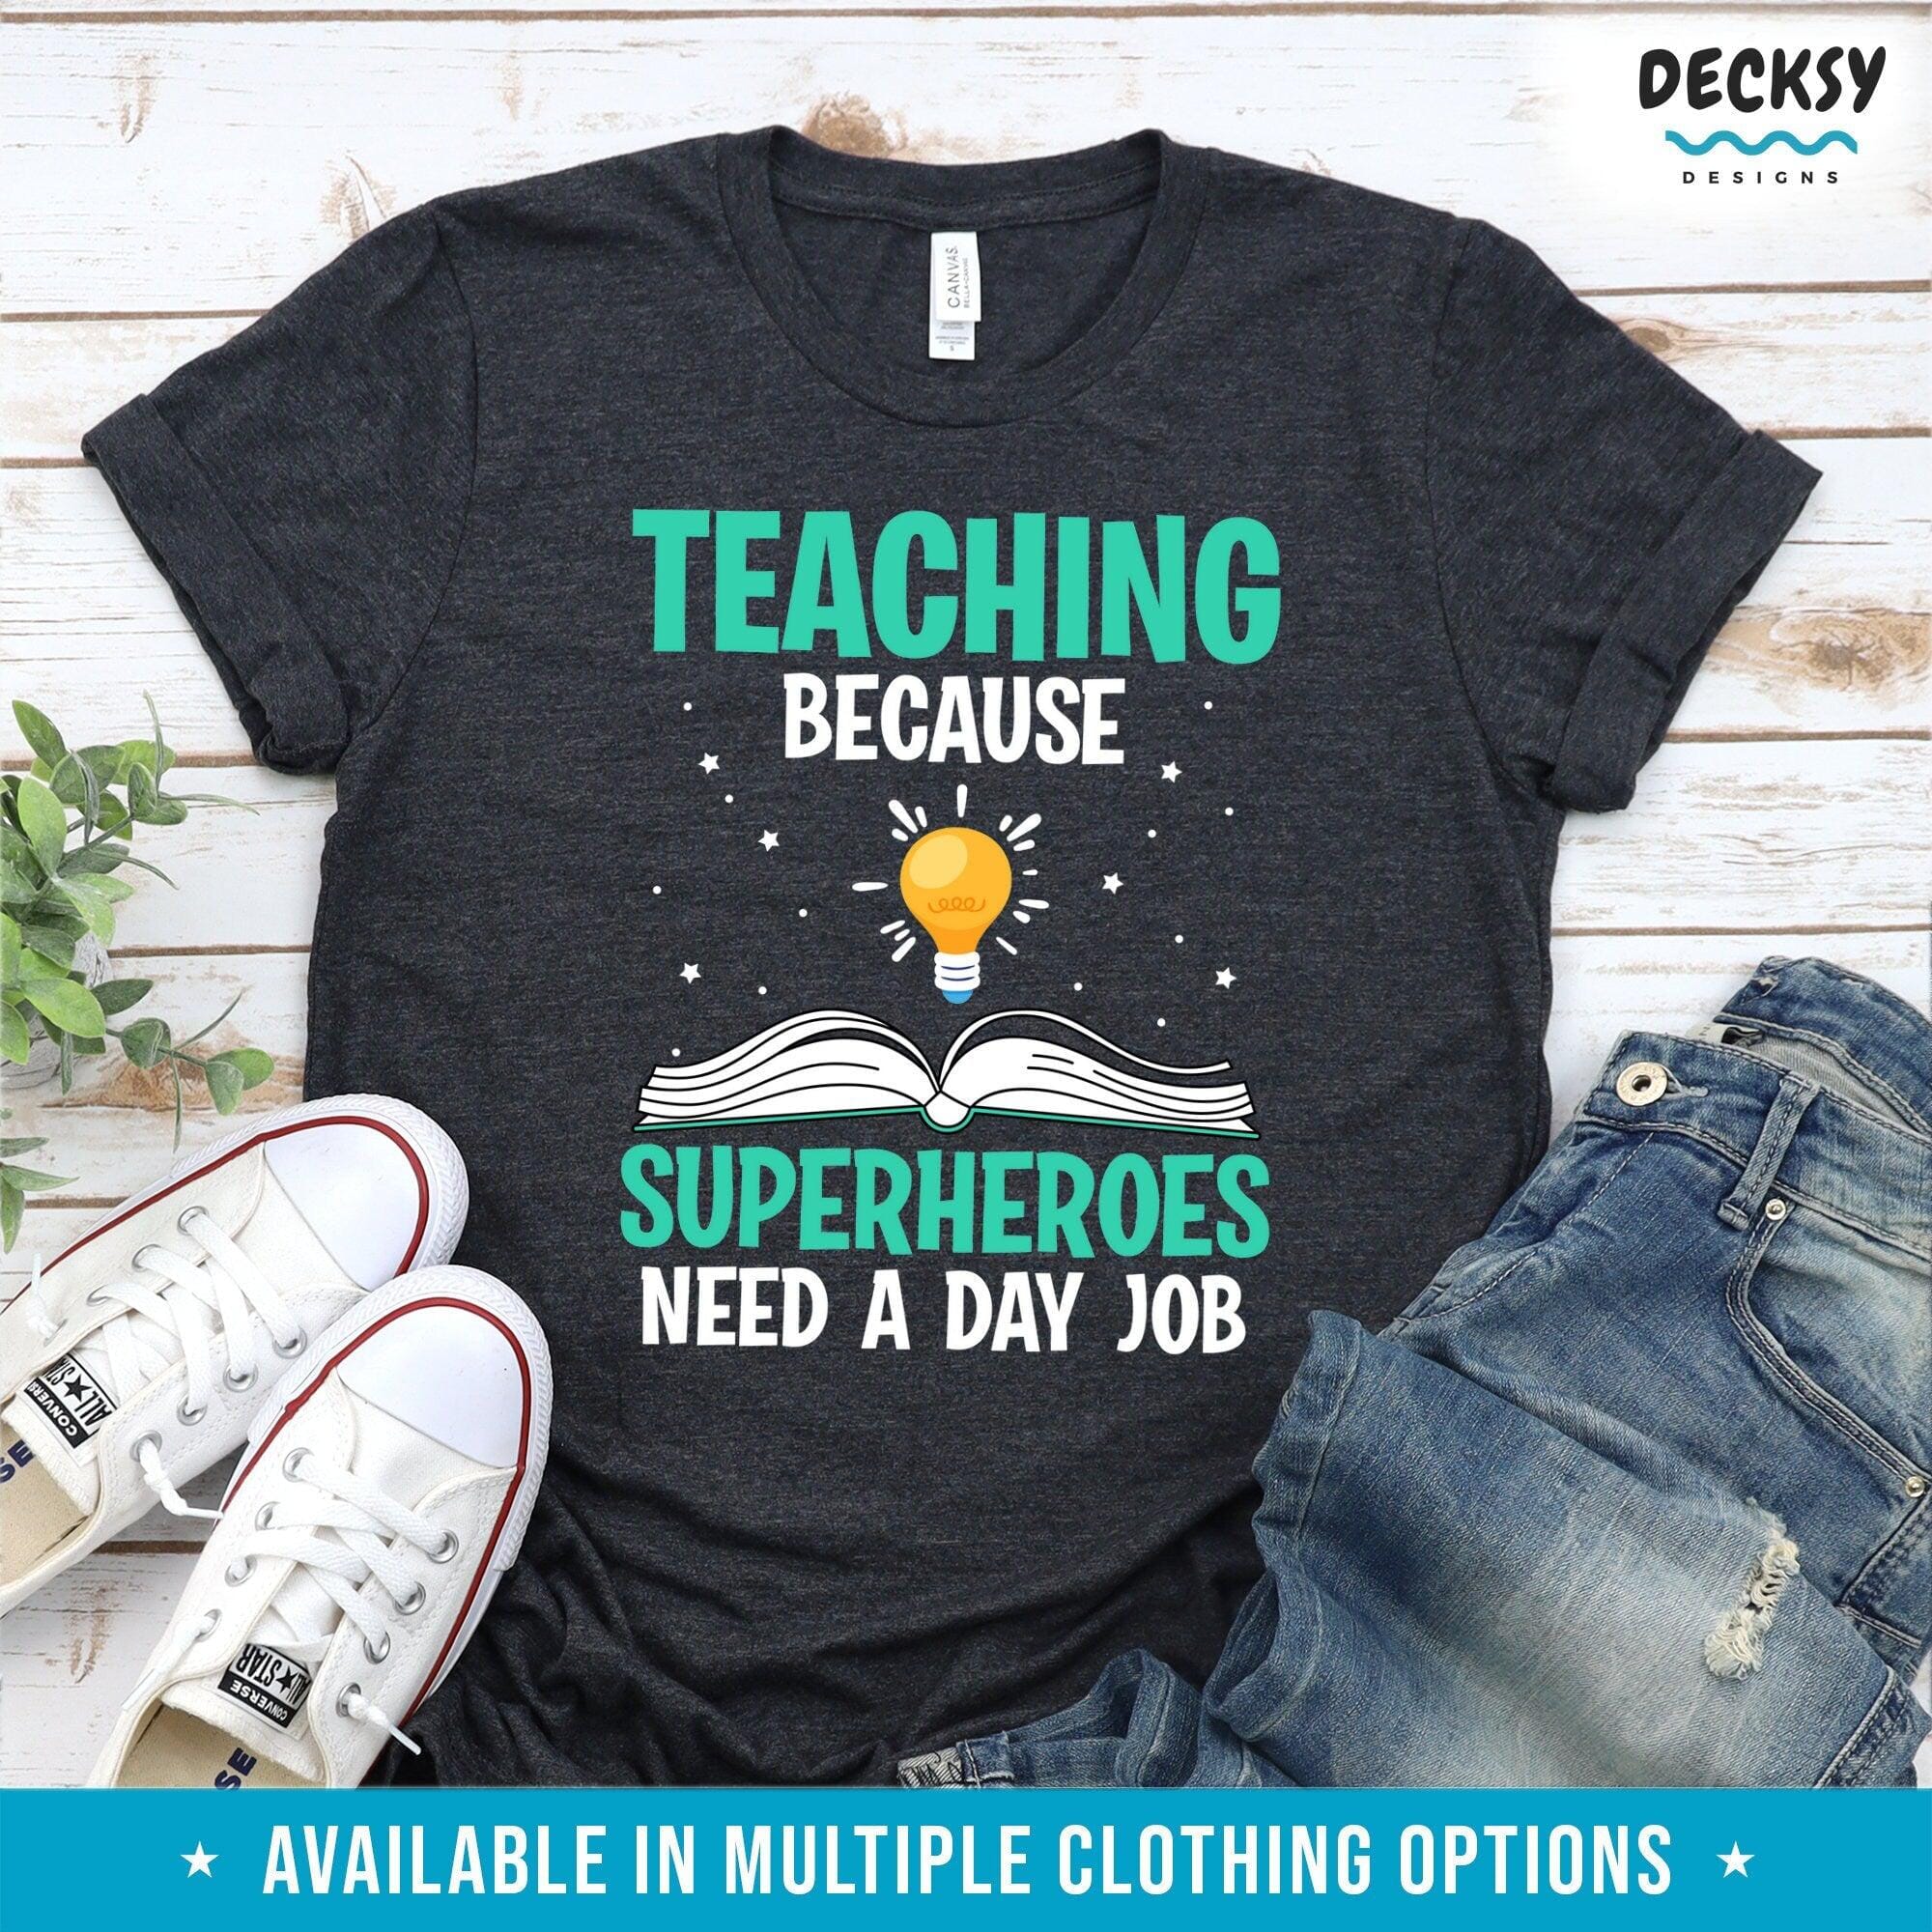 Teacher Shirt, Funny Gift for Teacher-Clothing:Gender-Neutral Adult Clothing:Tops & Tees:T-shirts:Graphic Tees-DecksyDesigns